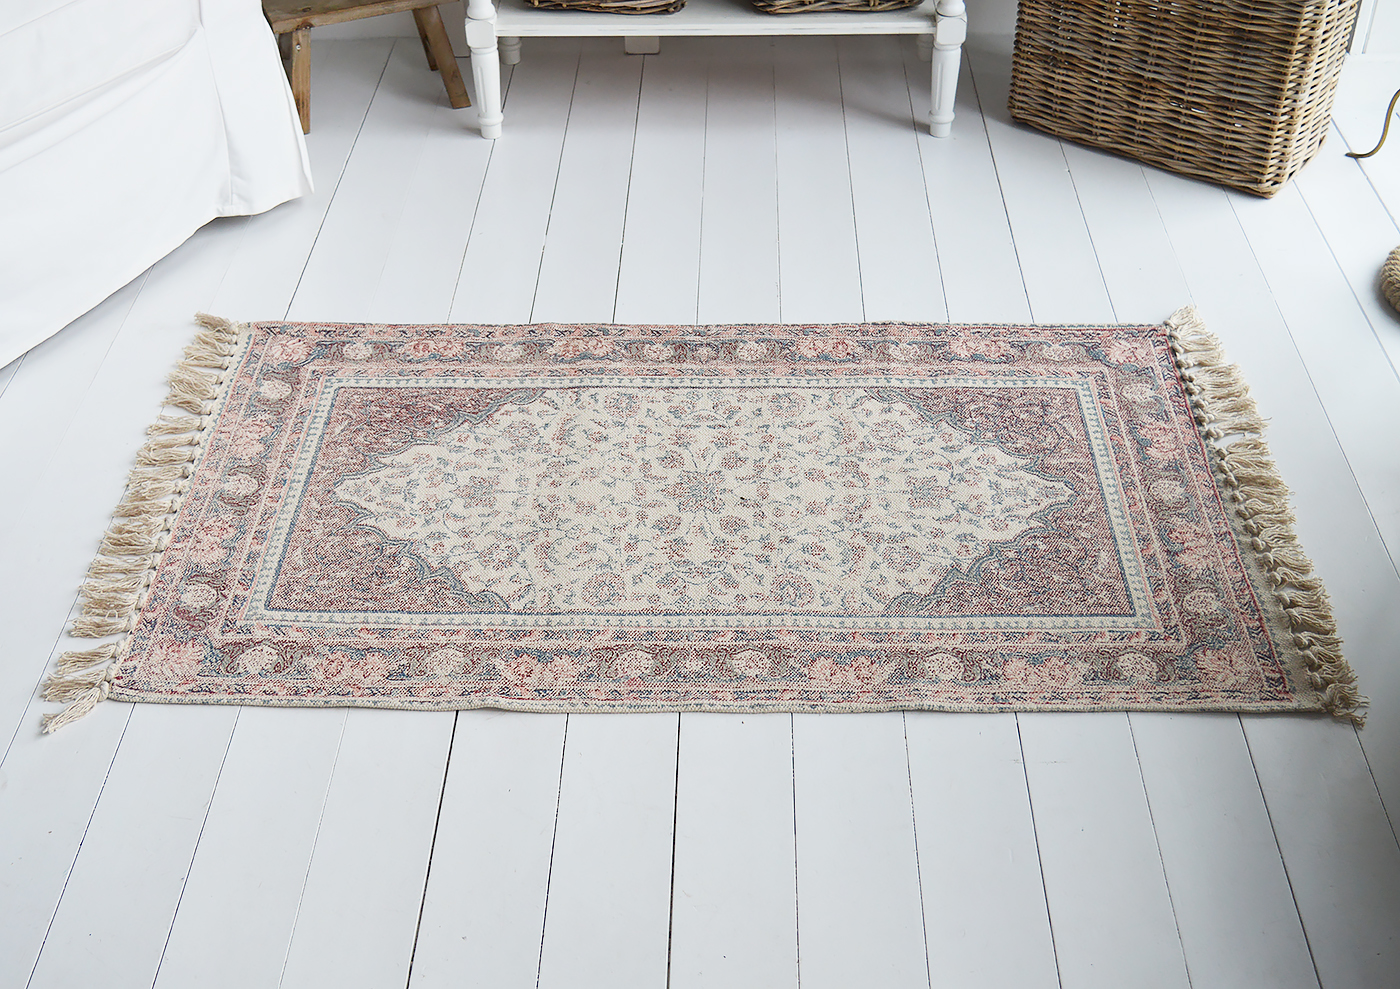 Hamptons Floor mat rug in shades of blues and pinks on a linen background to complement our country, farmhouse and Coastal furniture in New England styled homes and interiors